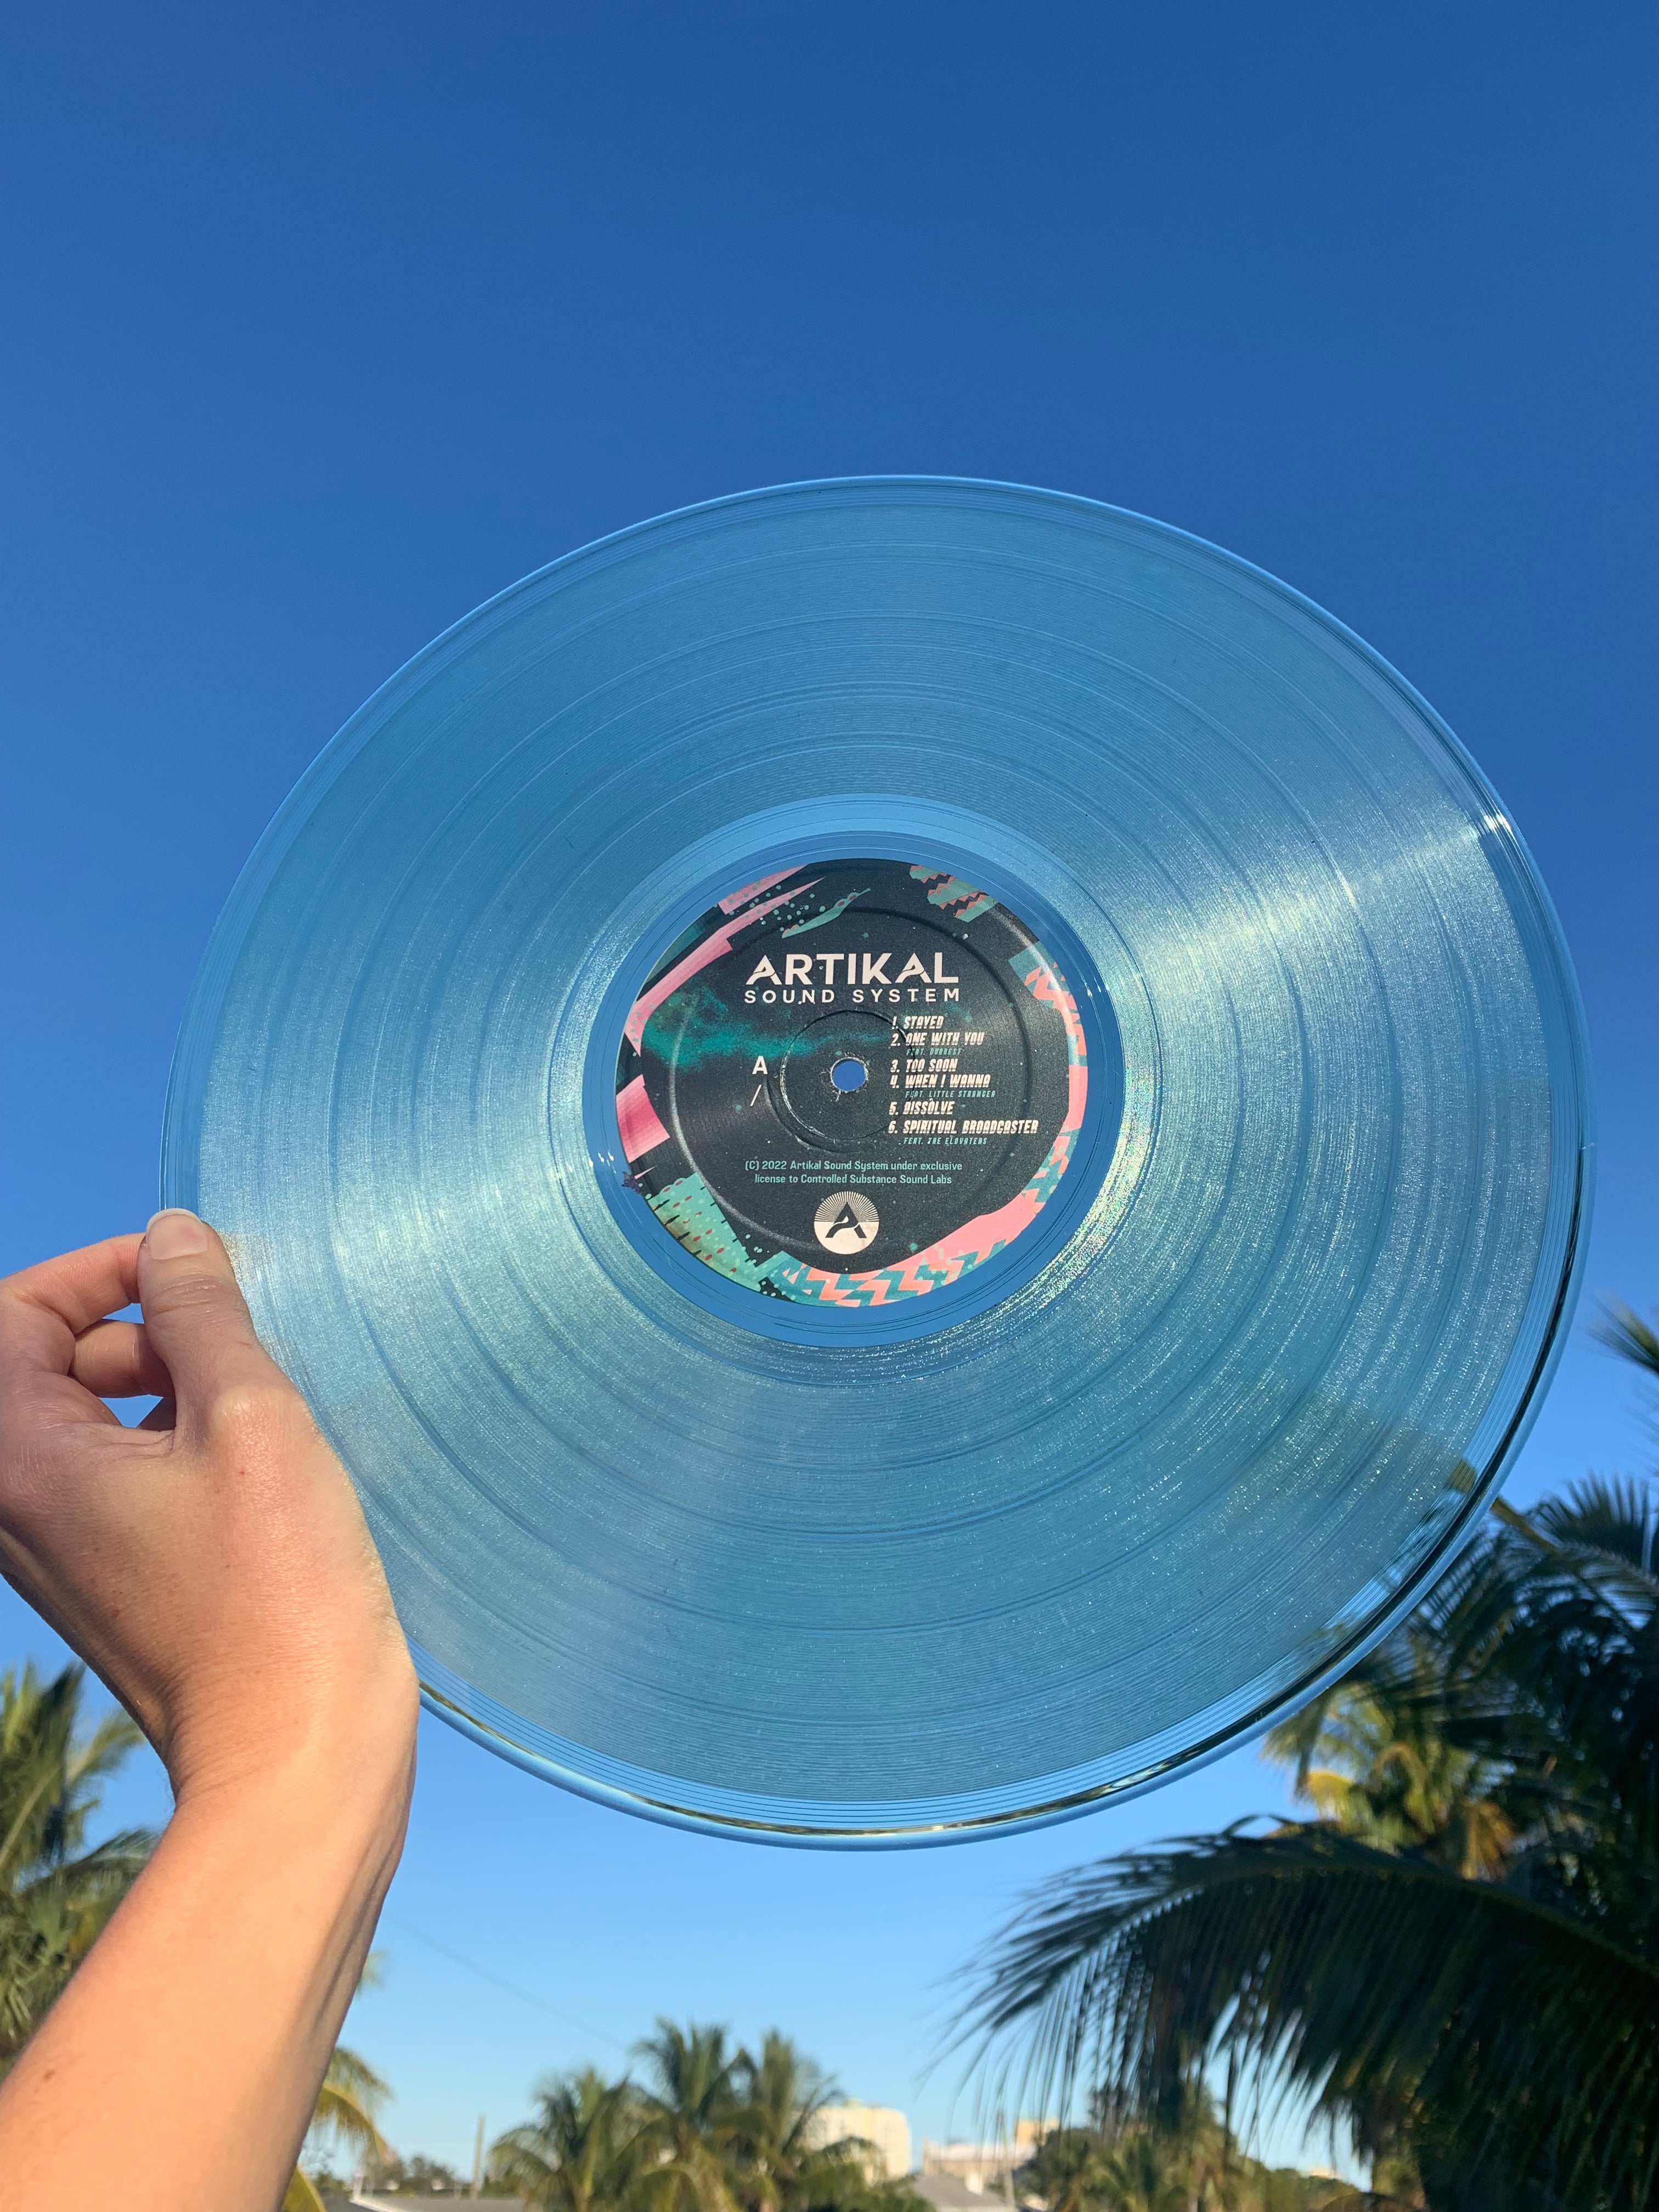 hardware pinion Descent Limited Edition** Coke Bottle Clear 'Welcome to Florida' Vinyl – Artikal  Sound System